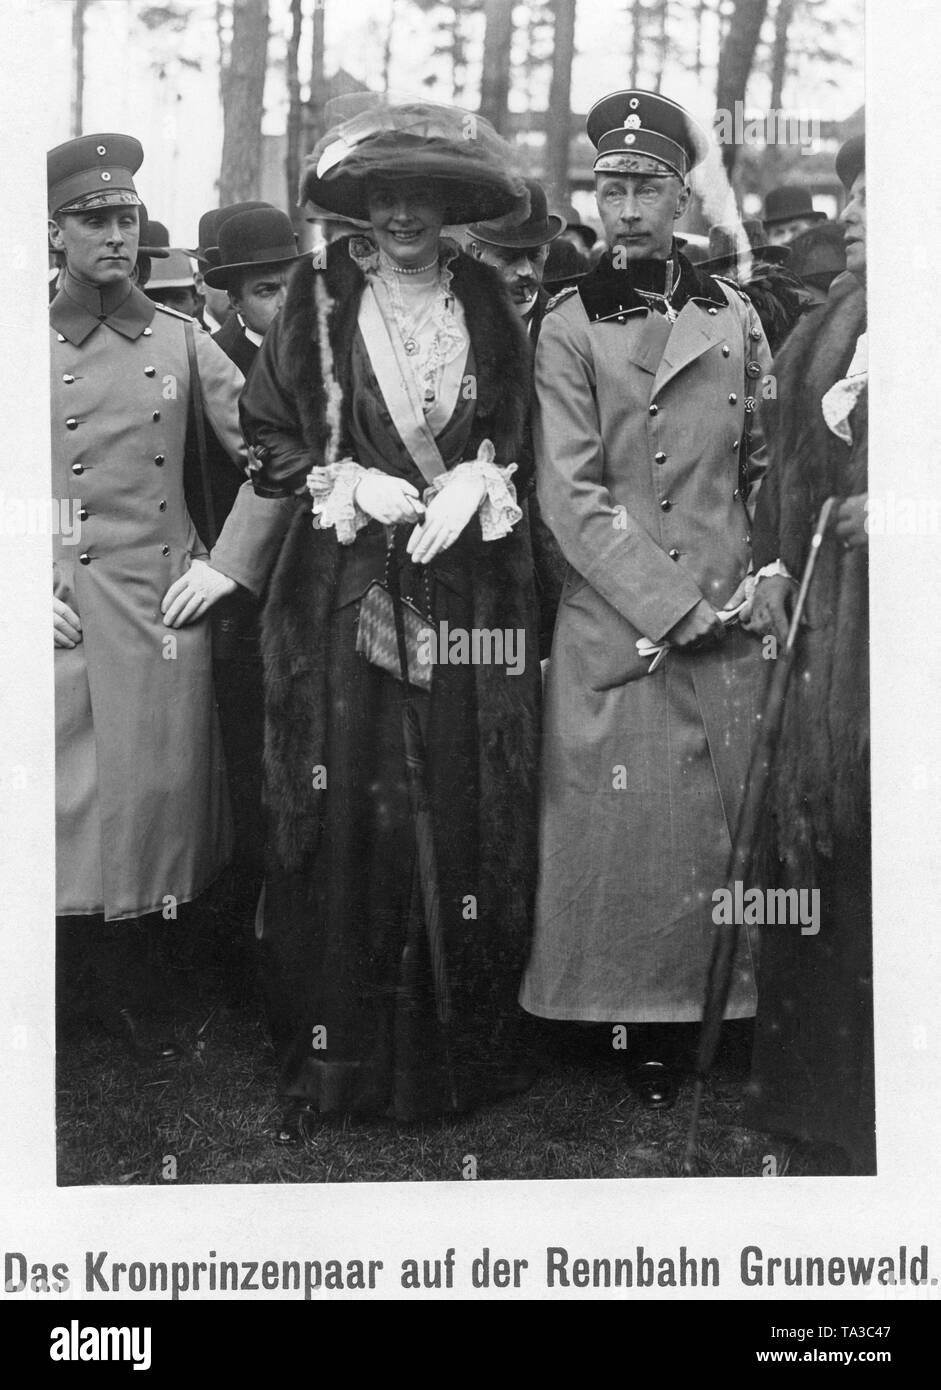 Crown Princess Cecilie (left) together with her husband Crown Prince Wilhelm of Prussia (right) on a racecourse in Berlin-Grunewald. Stock Photo